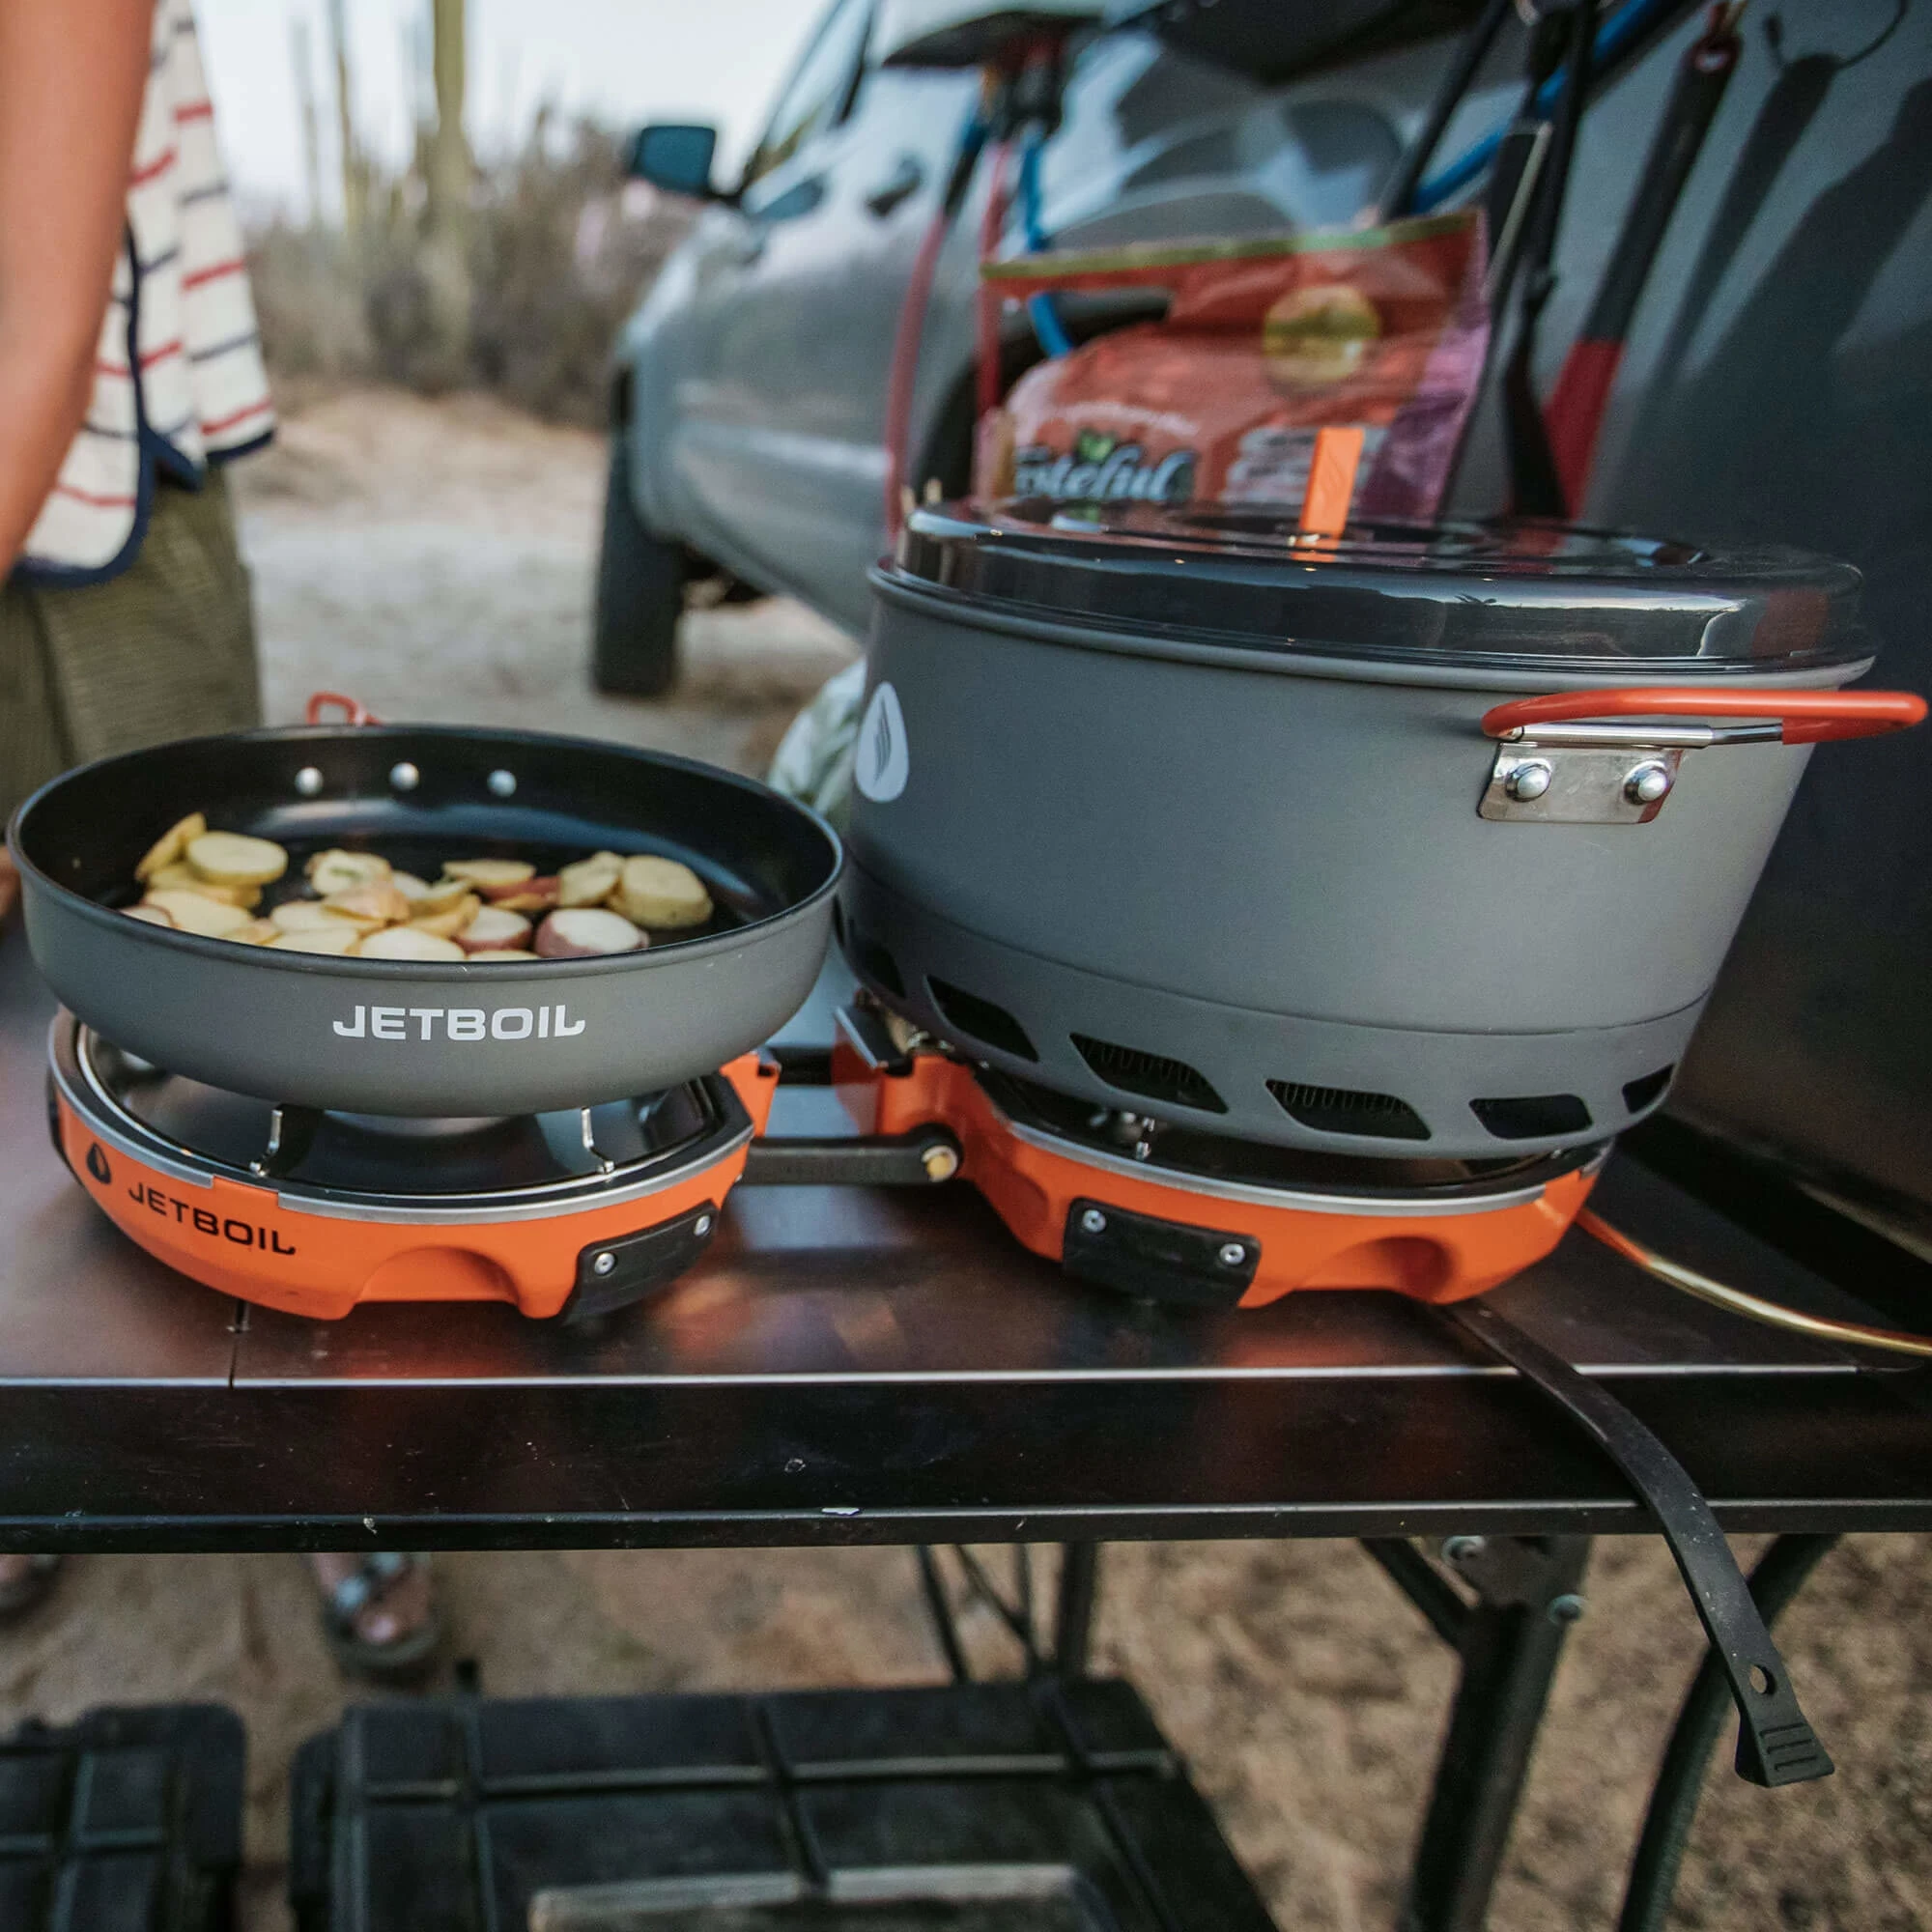 Top down view of delicious vegetable and egg meal cooking on Jetboil Genesis Basecamp System